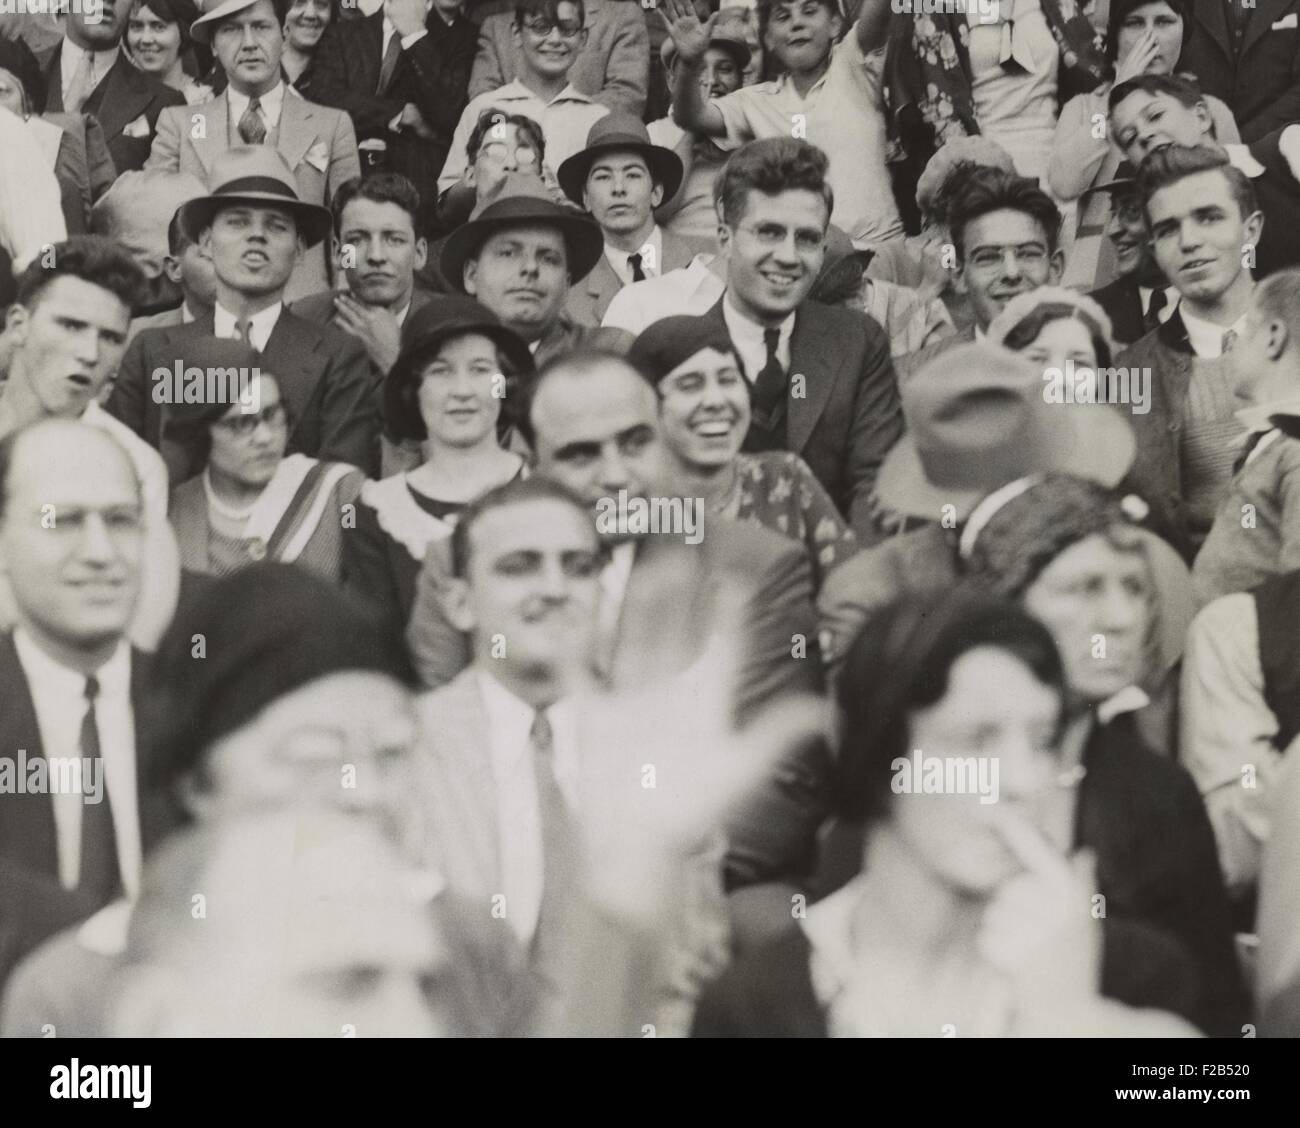 Al Capone (center), seated in front of three women, watching a college football game. He sits with other fans at the game between Northwestern and Nebraska at Dyche Stadium in Evanston, IL. Oct. 3, 1931. - (BSLOC 2015 1 14) Stock Photo